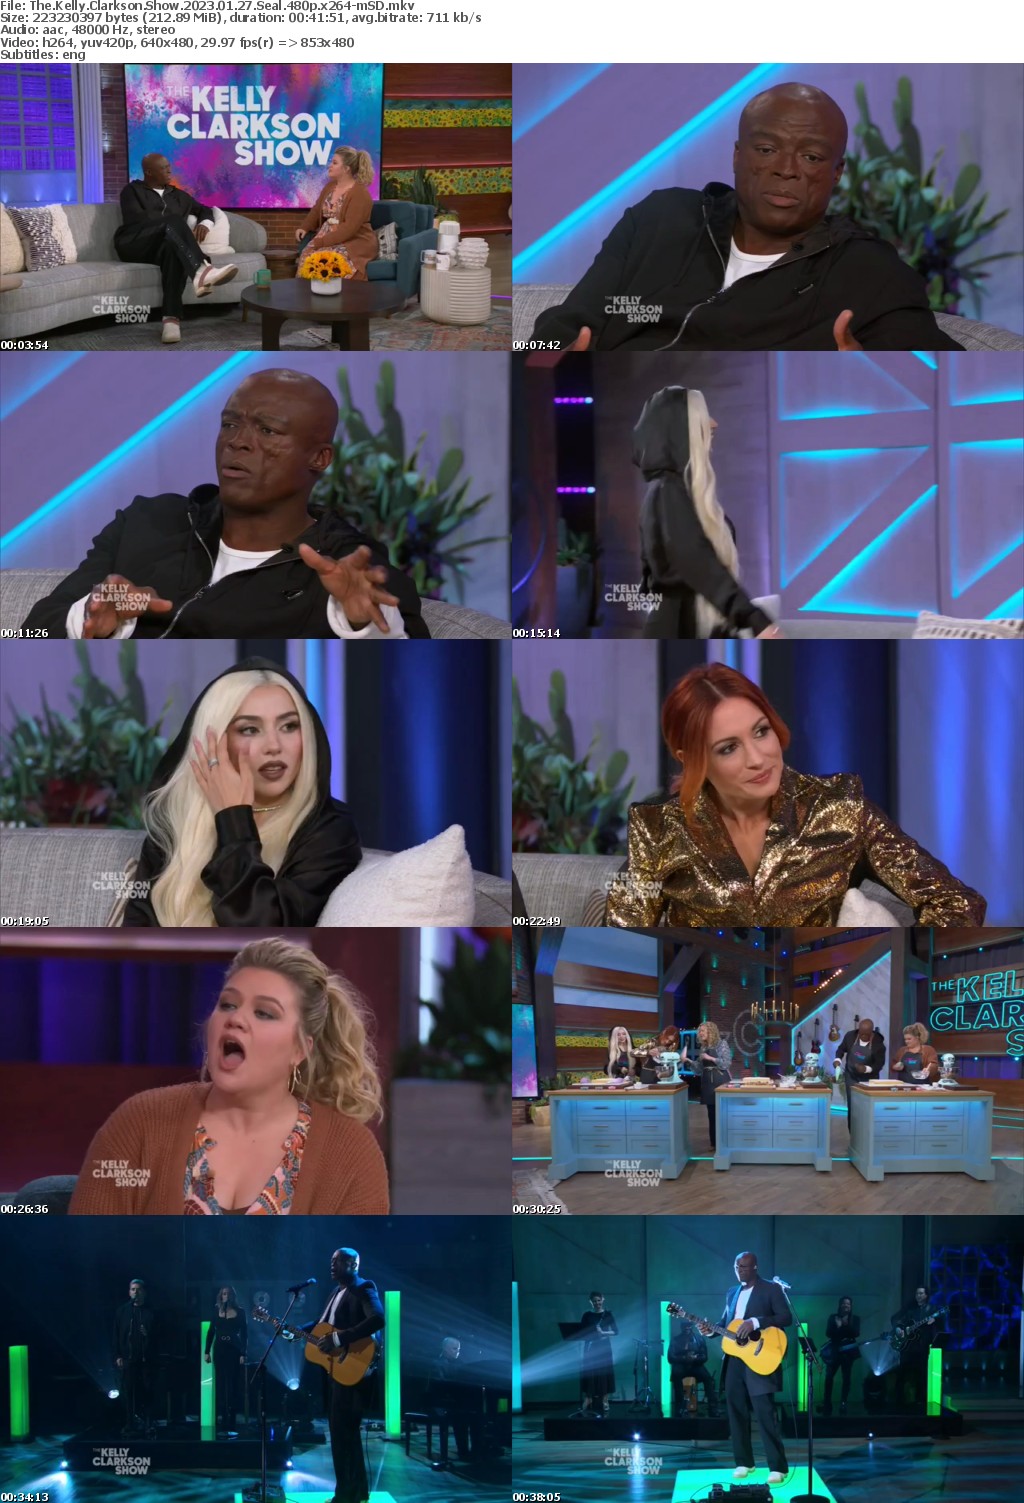 The Kelly Clarkson Show 2023 01 27 Seal 480p x264-mSD